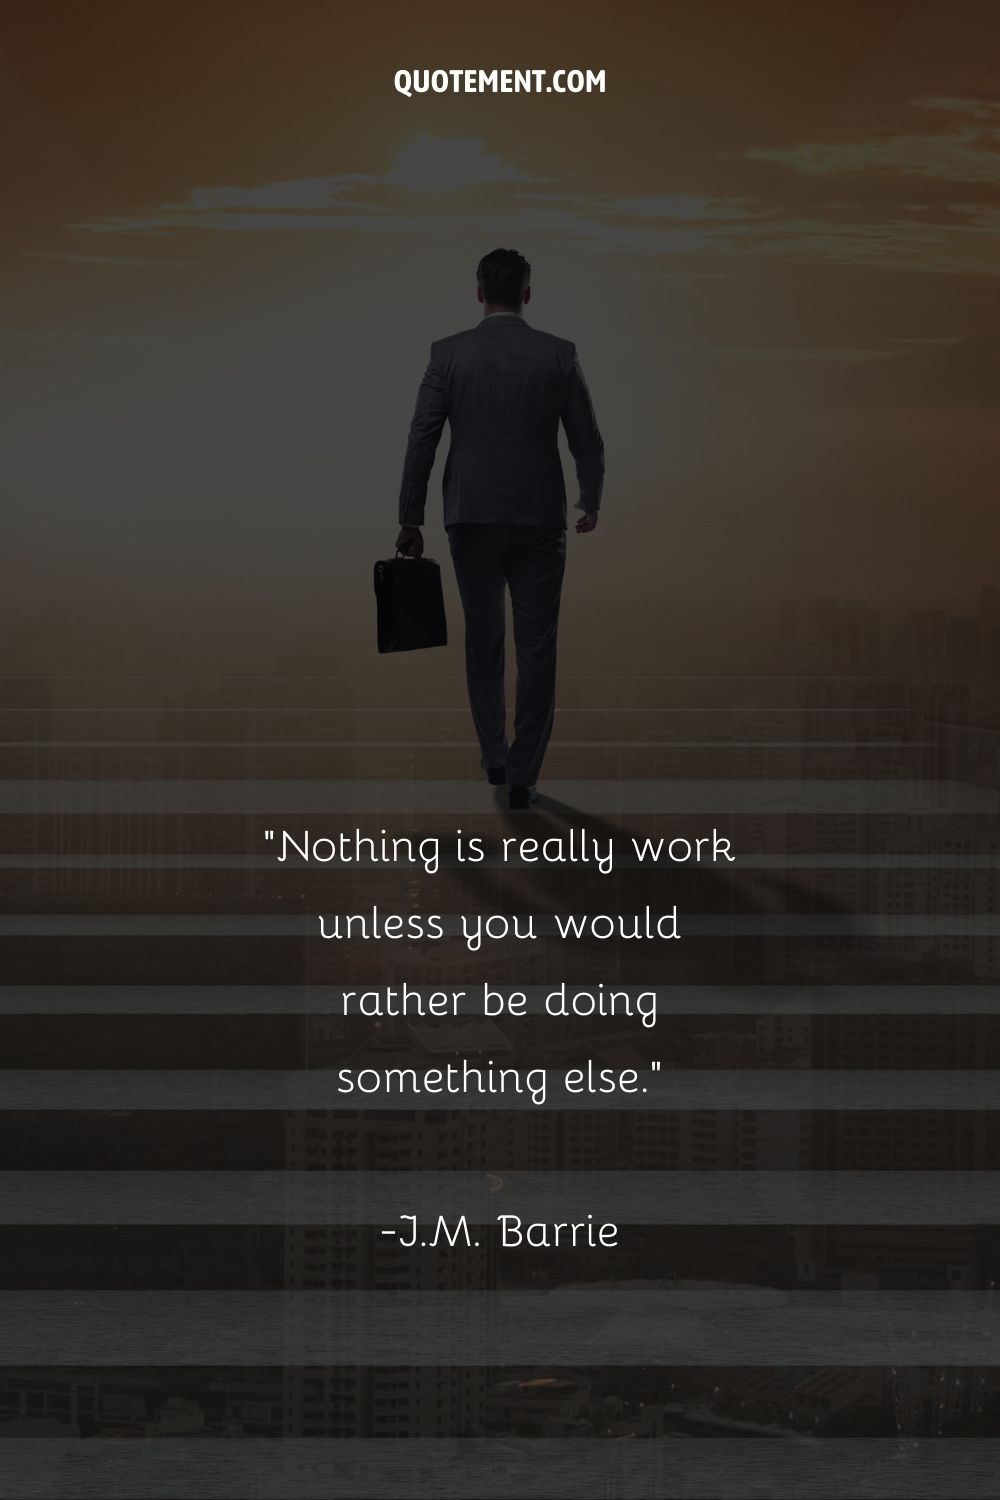 Nothing is really work unless you would rather be doing something else